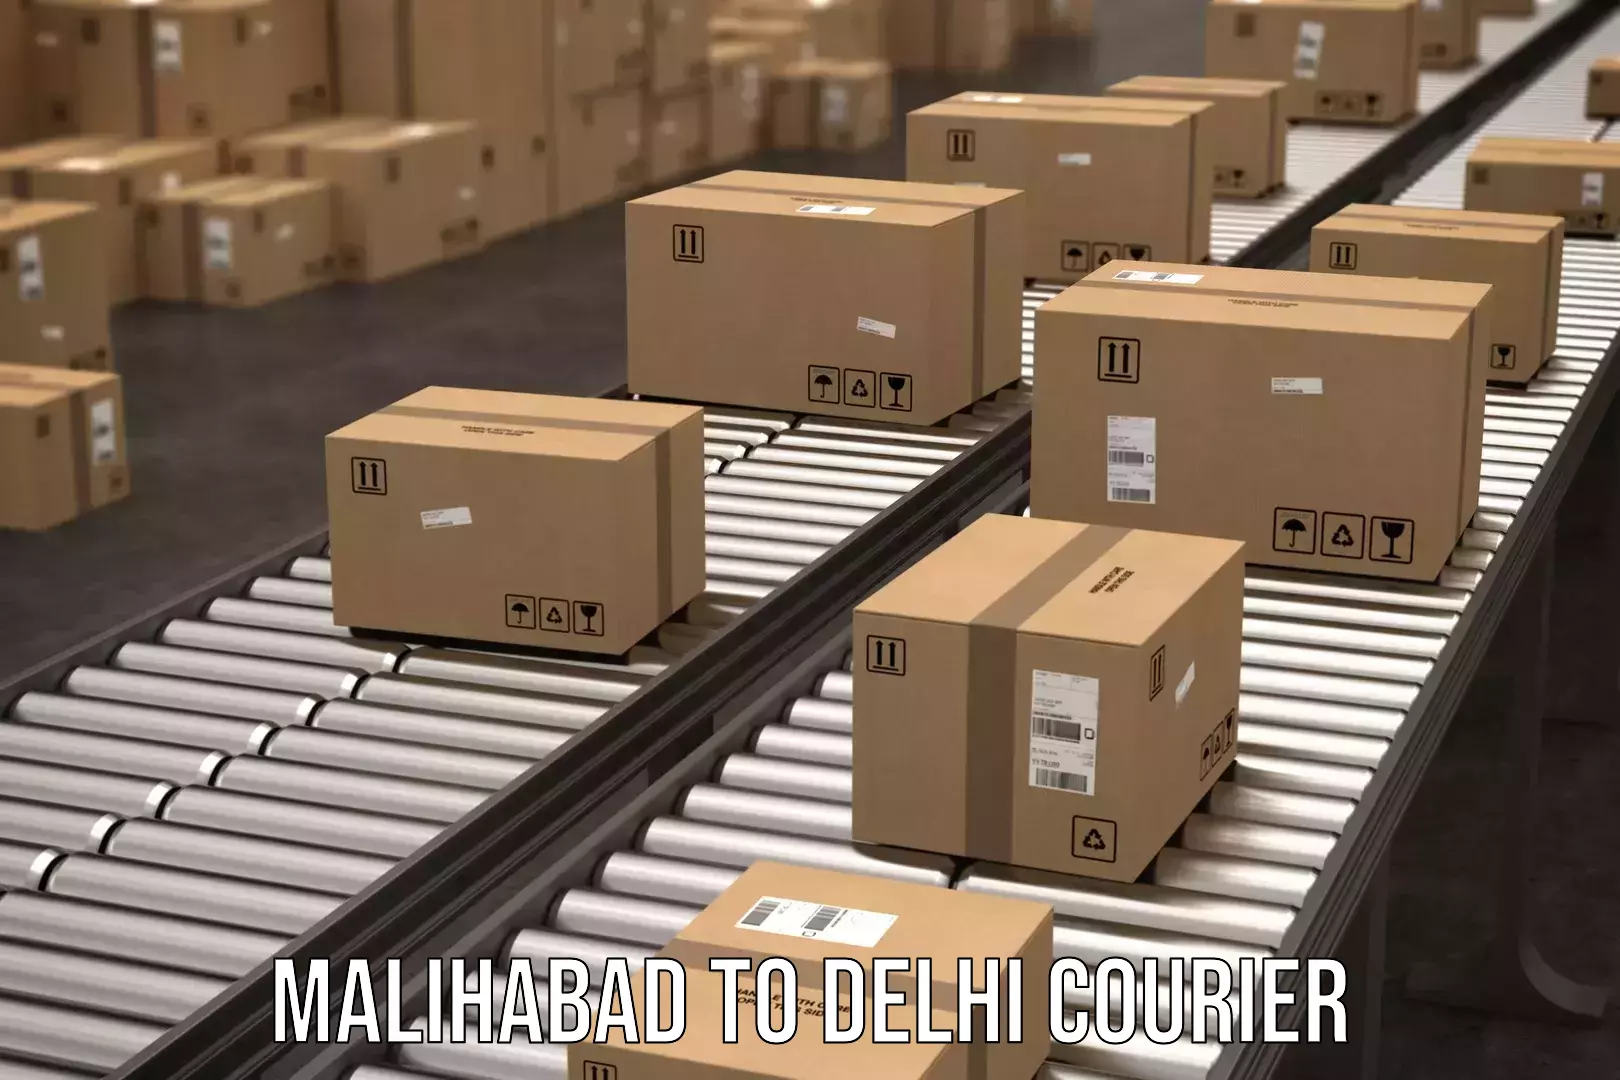 24/7 courier service in Malihabad to IIT Delhi